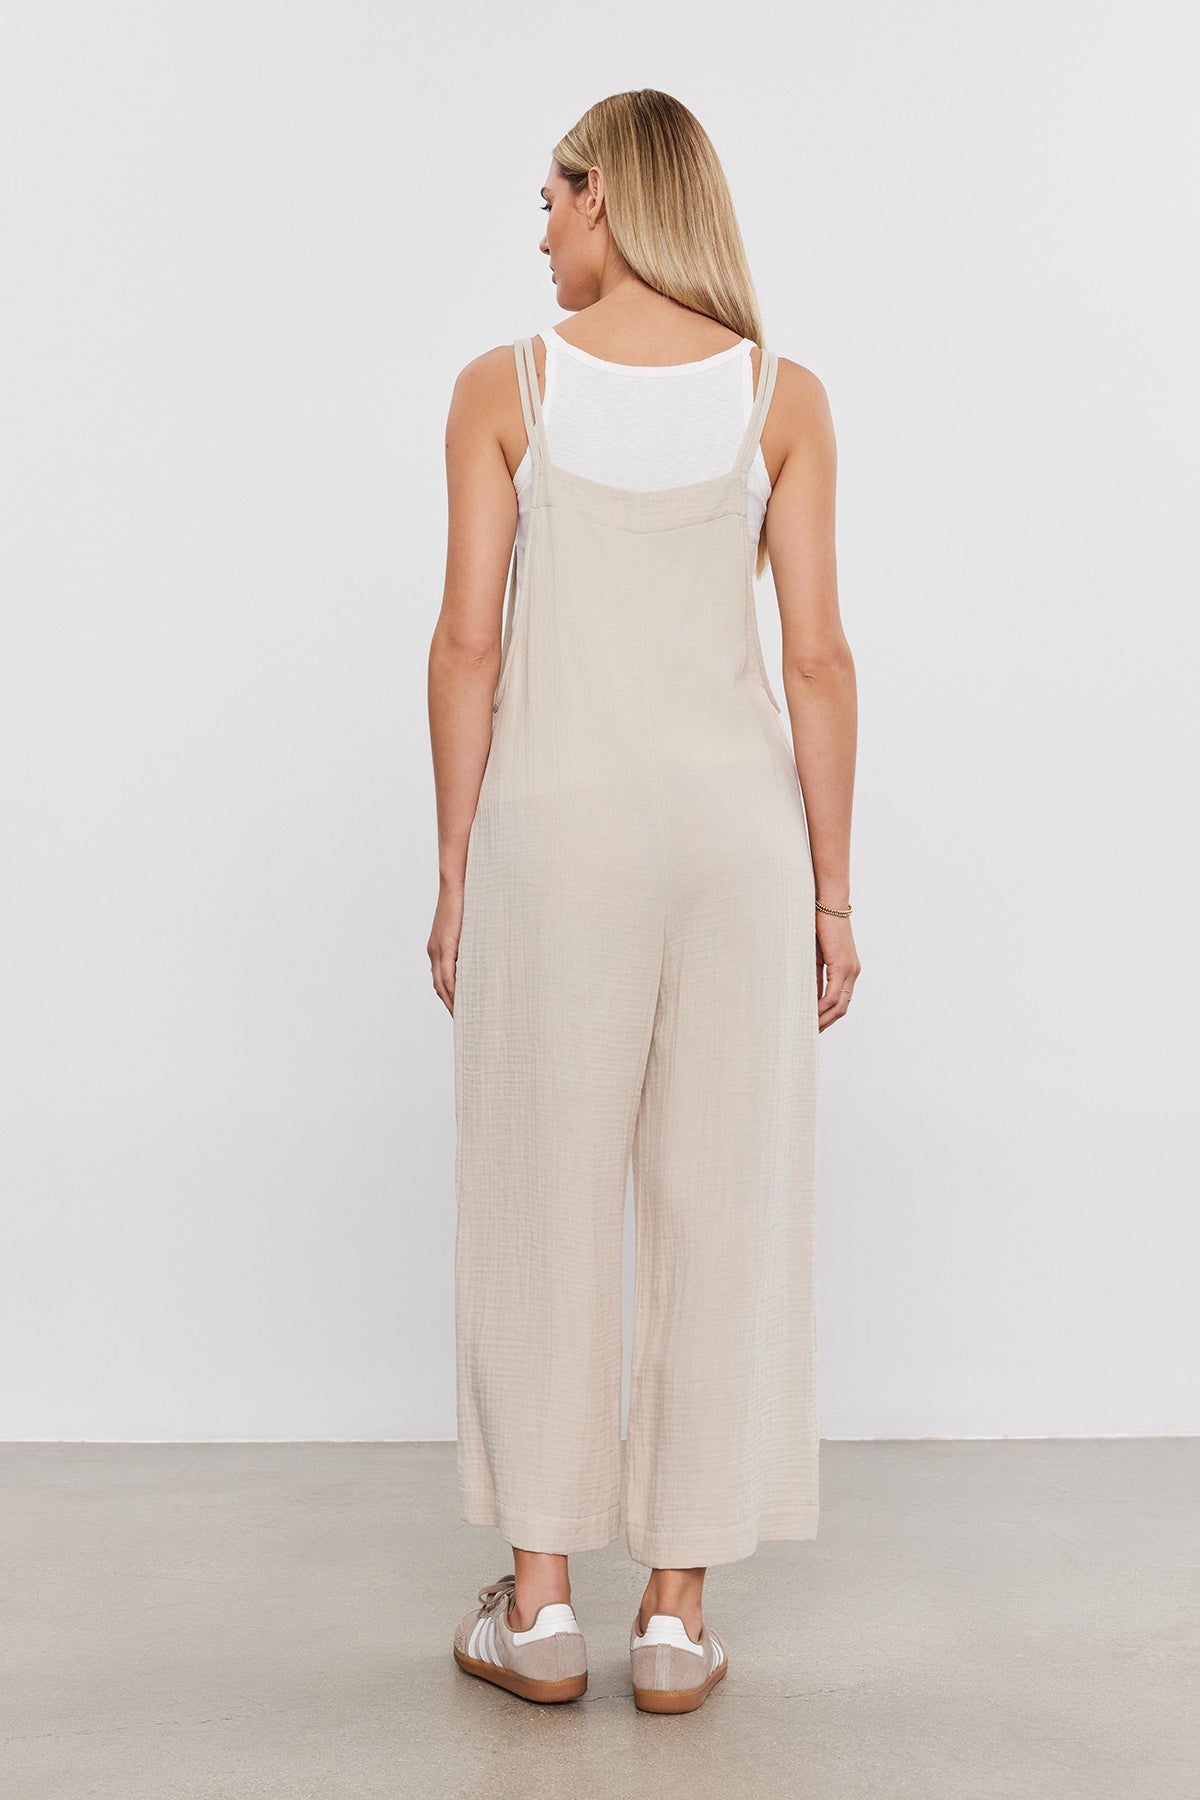 Woman standing facing away, wearing a Velvet by Graham & Spencer EVERLEE COTTON GAUZE JUMPSUIT with wide legs and white sandals on a plain background.-36910029144257